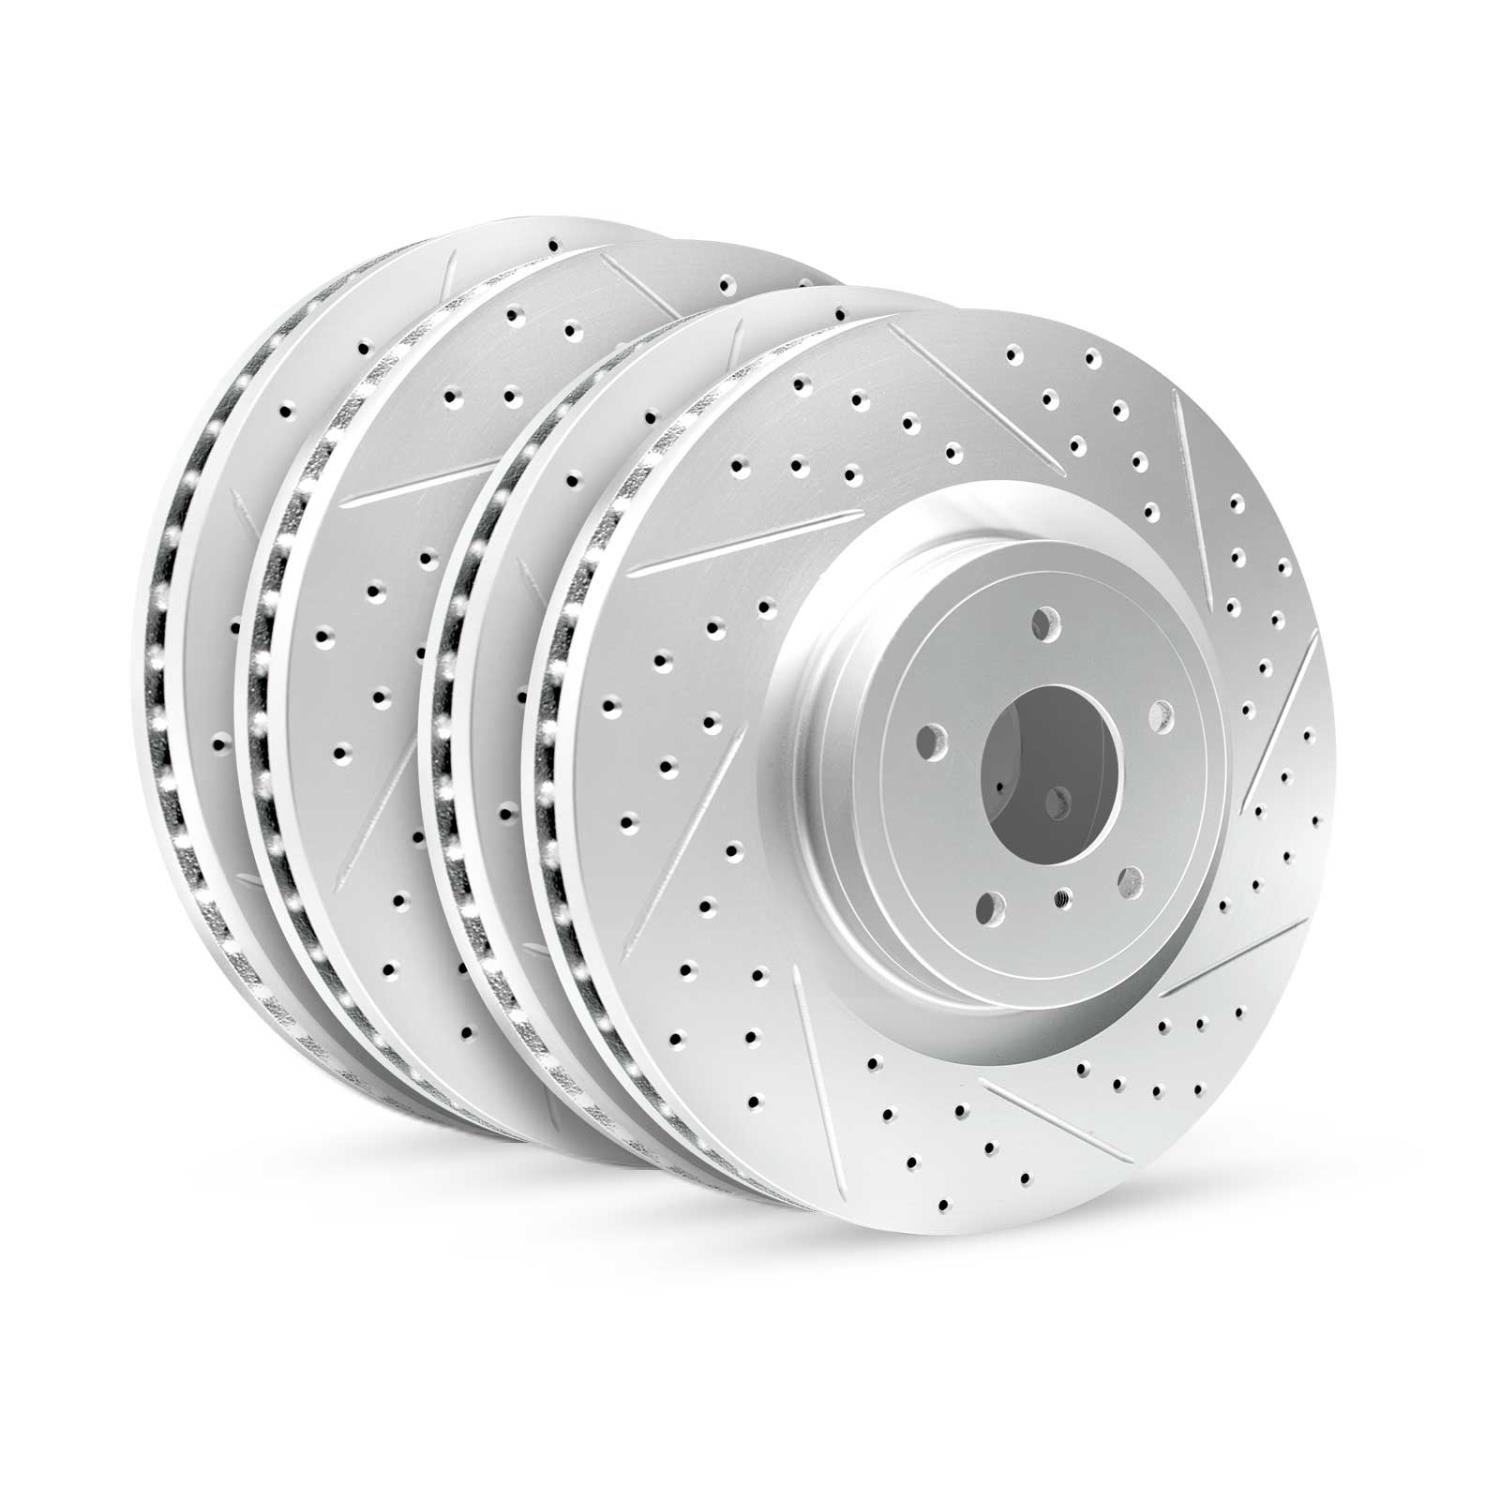 GEO-Carbon Drilled/Slotted Rotor/Drums, 1993-2002 Fits Multiple Makes/Models, Position: Front/Rear